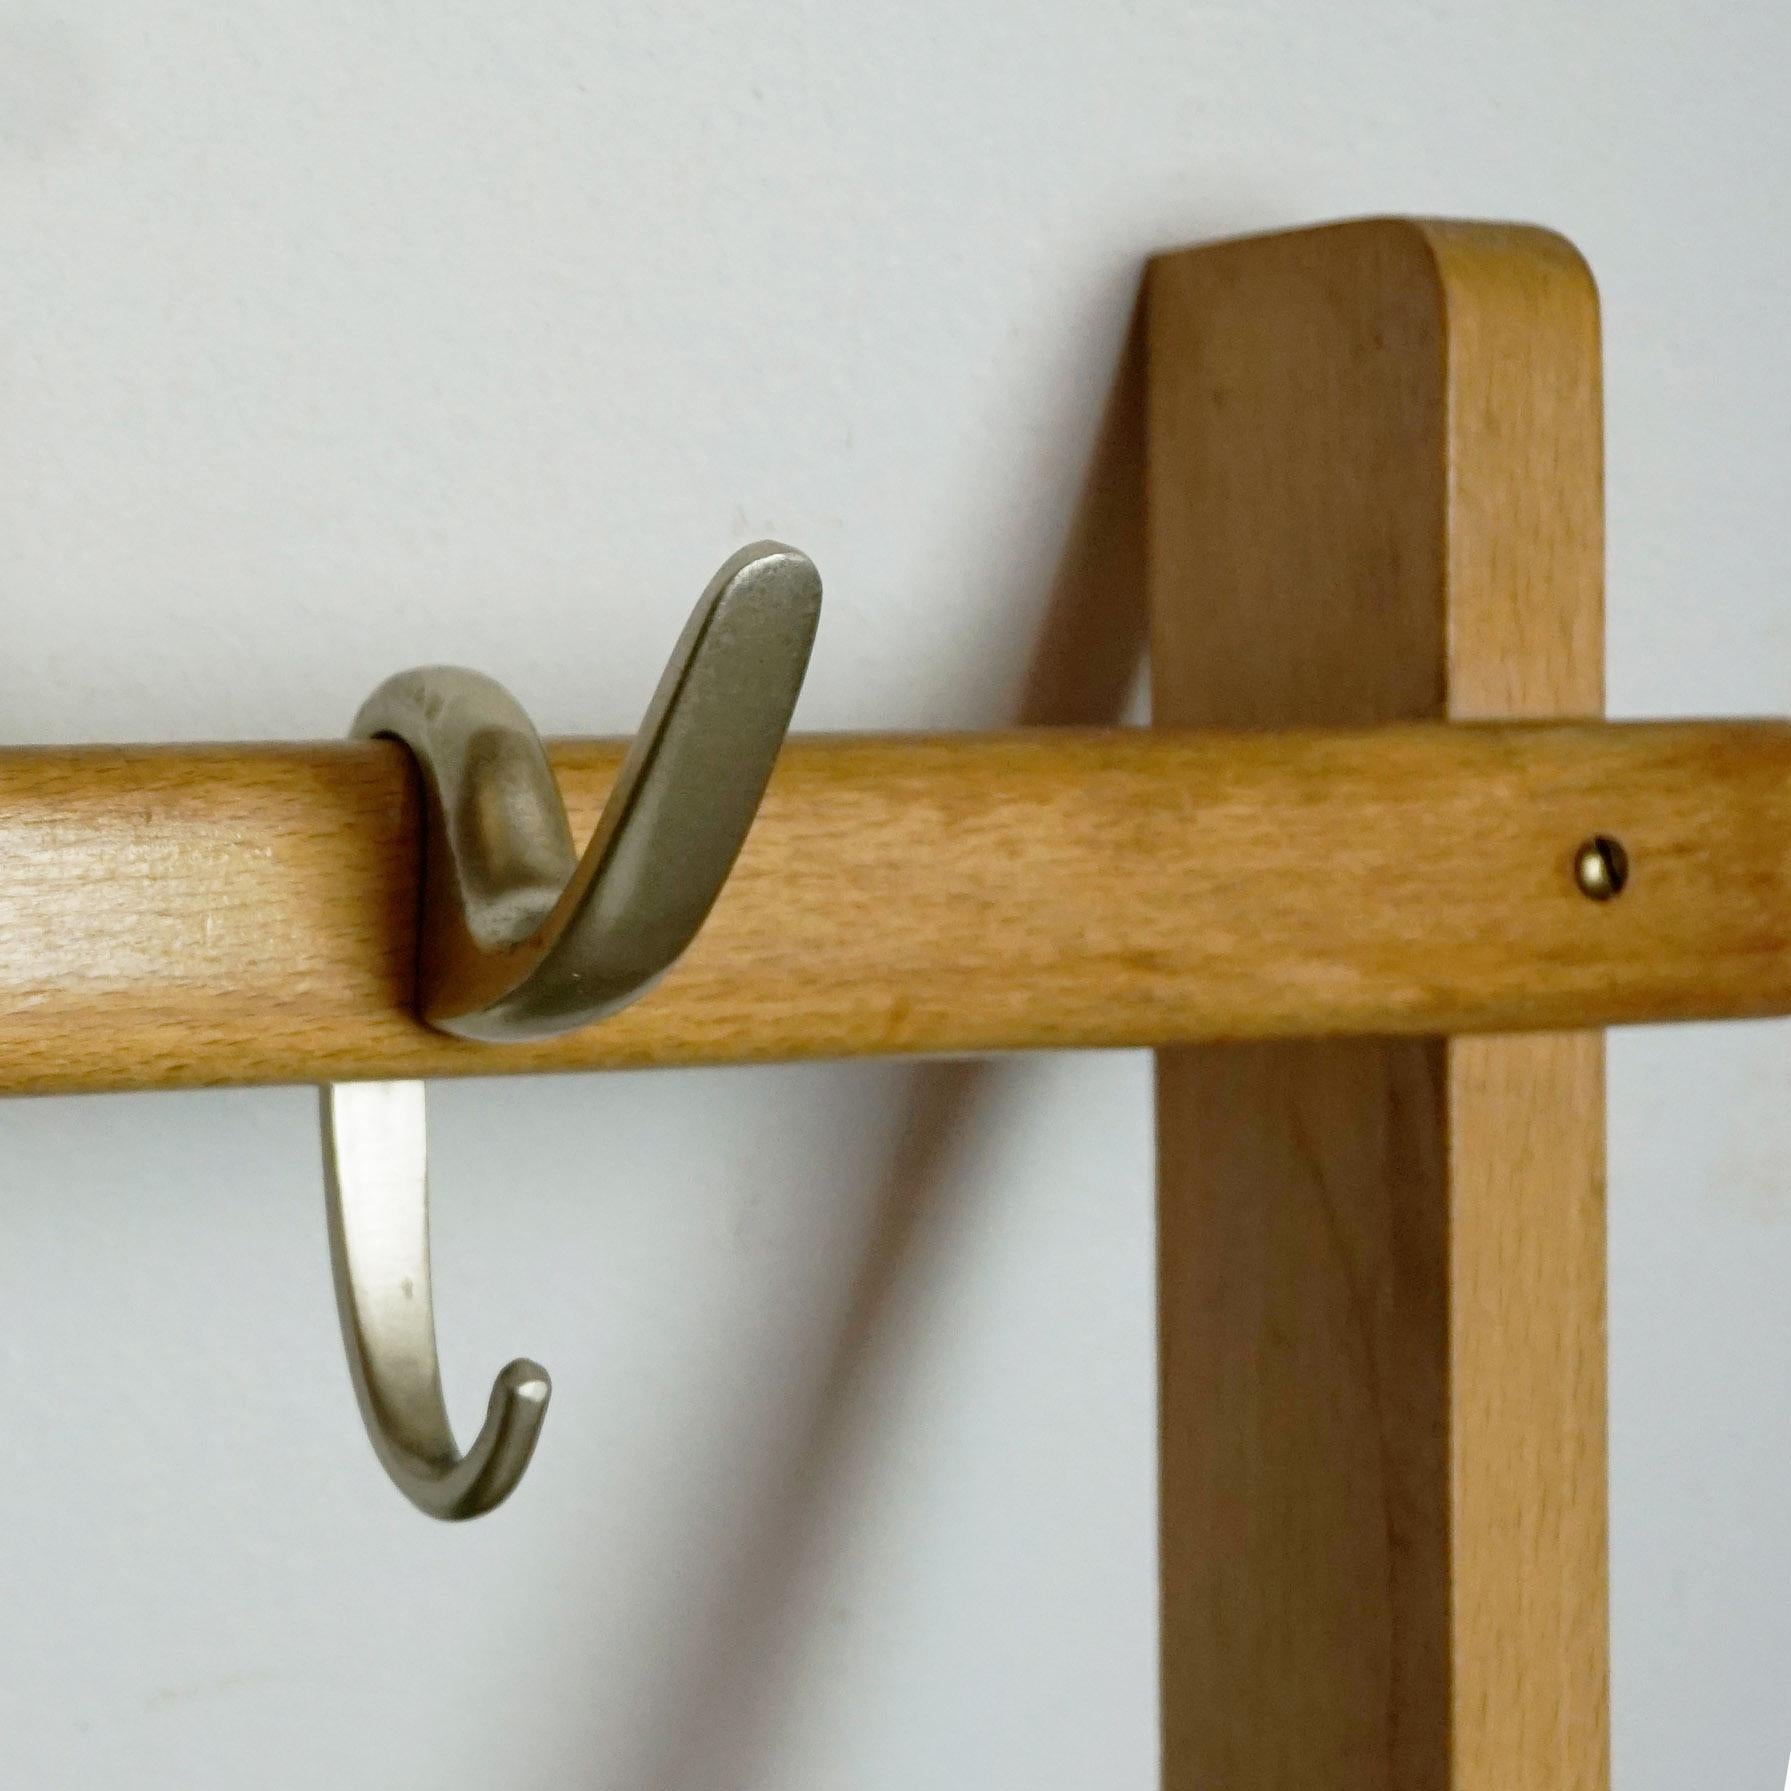 Sought after rare Austrian midcentury wall-mounted coat rack designed by the Austrian architect and designer Carl Auböck. It features a beechwood frame with six movable anodized aluminum hooks. It is in beautiful original vintage condition.